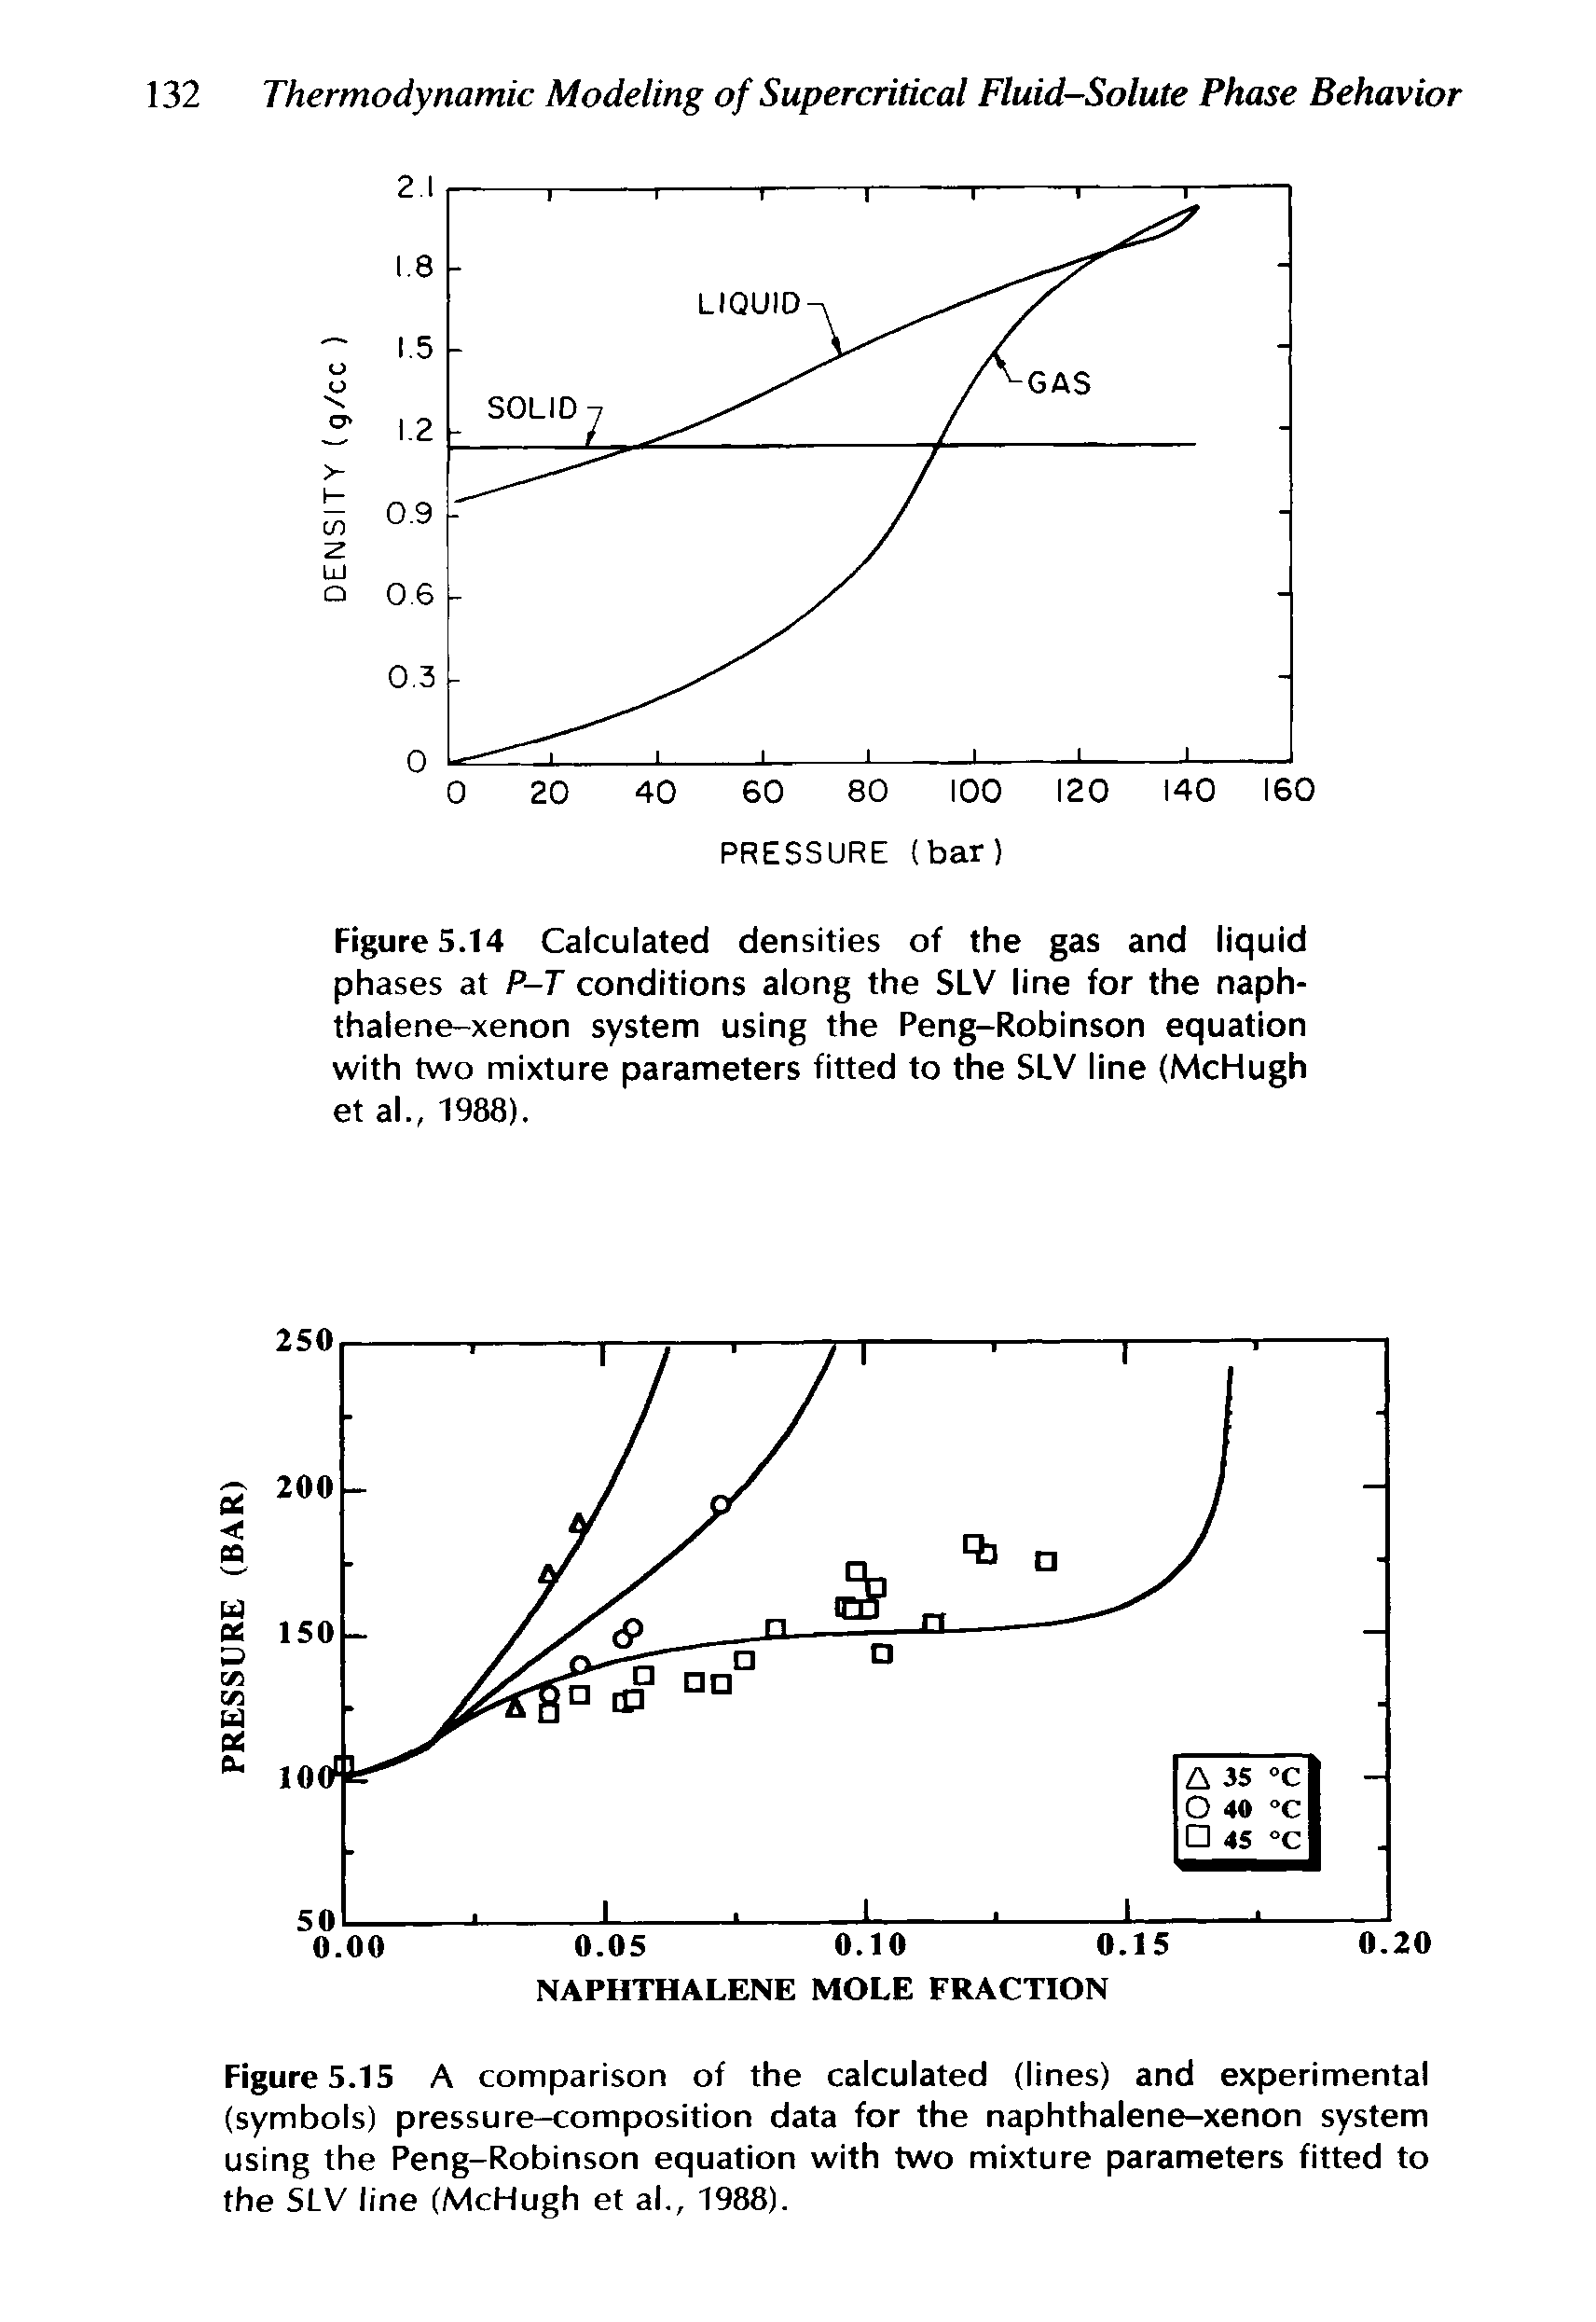 Figure 5.T4 Calculated densities of the gas and liquid phases at P-T conditions along the SLV line for the naphthalene-xenon system using the Peng-Robinson equation with two mixture parameters fitted to the SLV line (McHugh et al., 1988).